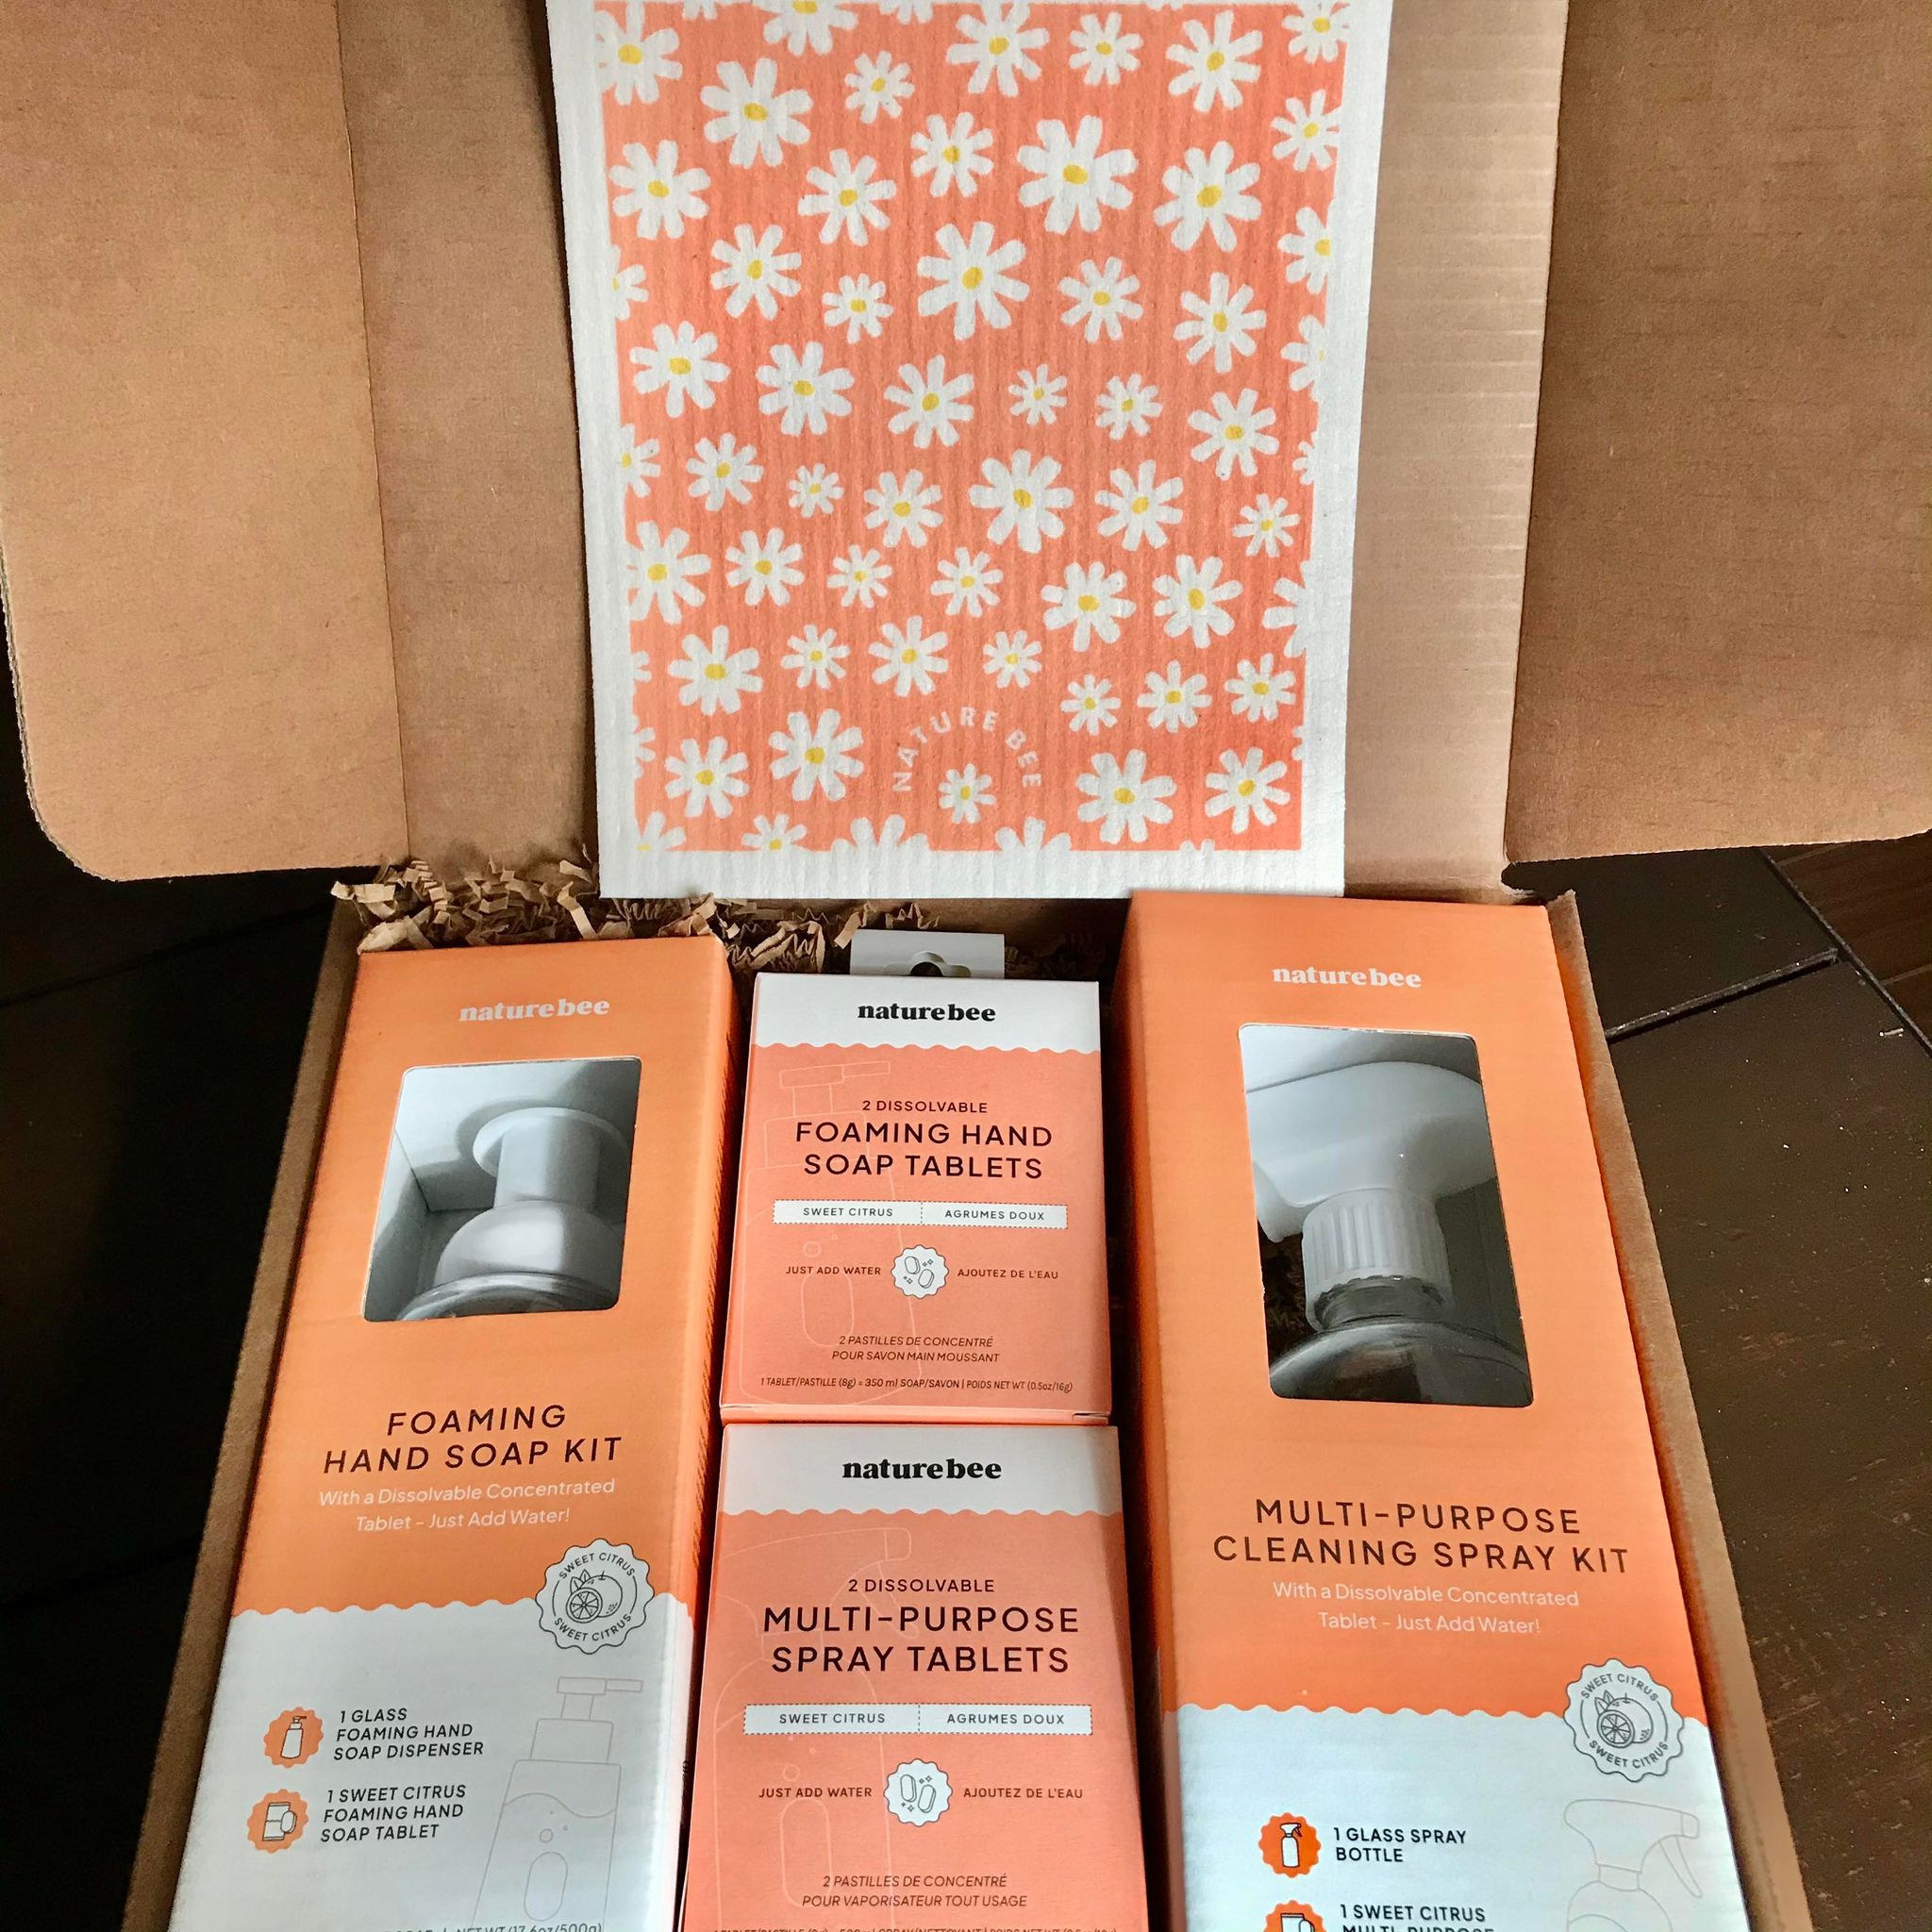 Included in this sweet citrus deluxe giff set is Swedish sponge cloth in a white daisy pattern on an orange background, a foaming hand soap kit,  a multi-purpose cleaning spray kit, a 2 pack of foaming hand soap tablets and a 2 pack of multi-purpose spray cleaning tablets